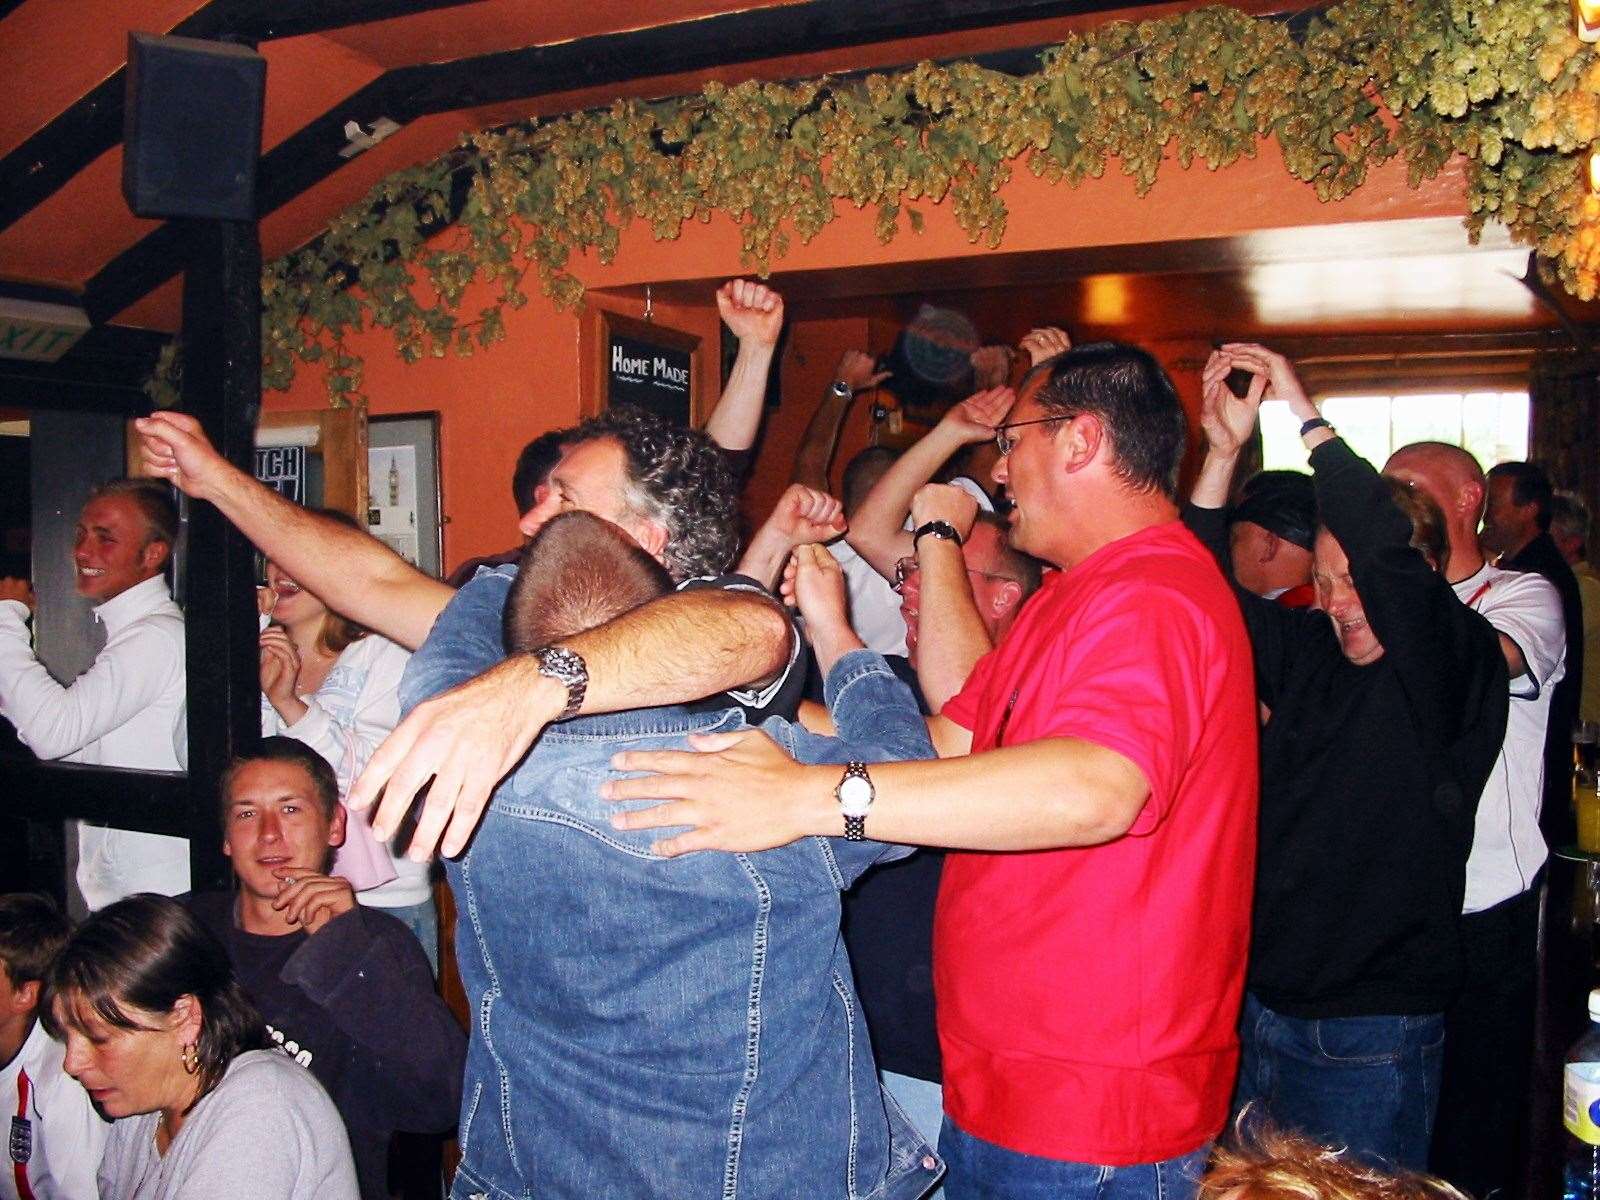 Football fans at the Ship Inn, Ospringe, celebrate after England beat Argentina in the 2002 World Cup